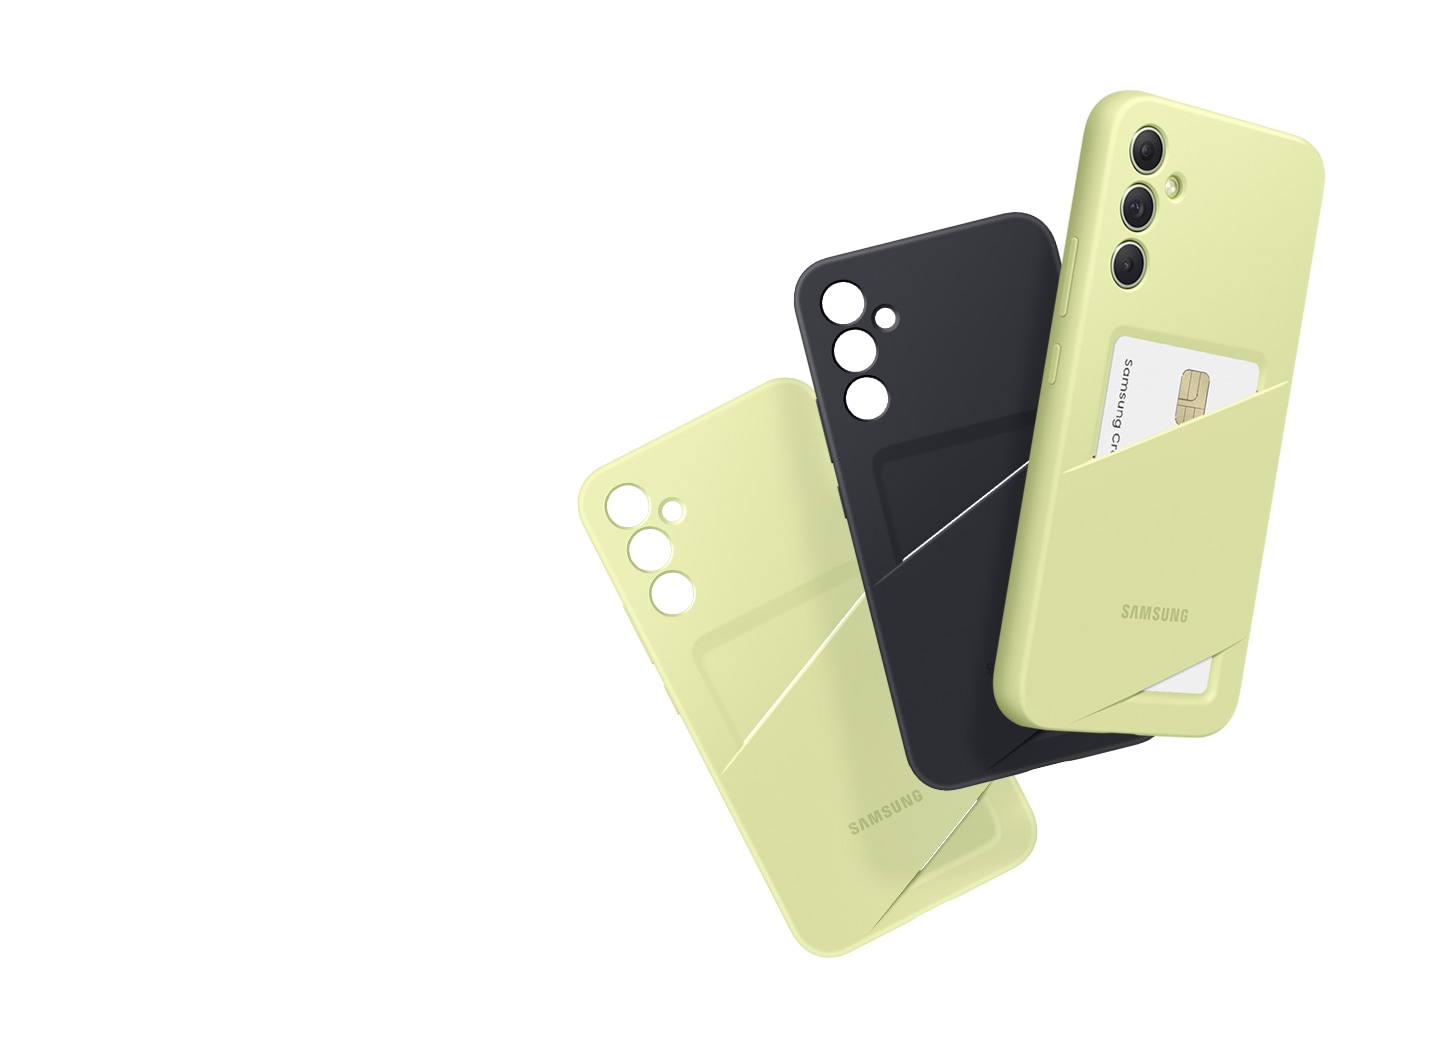 Three Card Slot Cases, two in Lime and one in Black, show the backsides with a Galaxy device encased in the rightmost, Lime Card Slot Case.